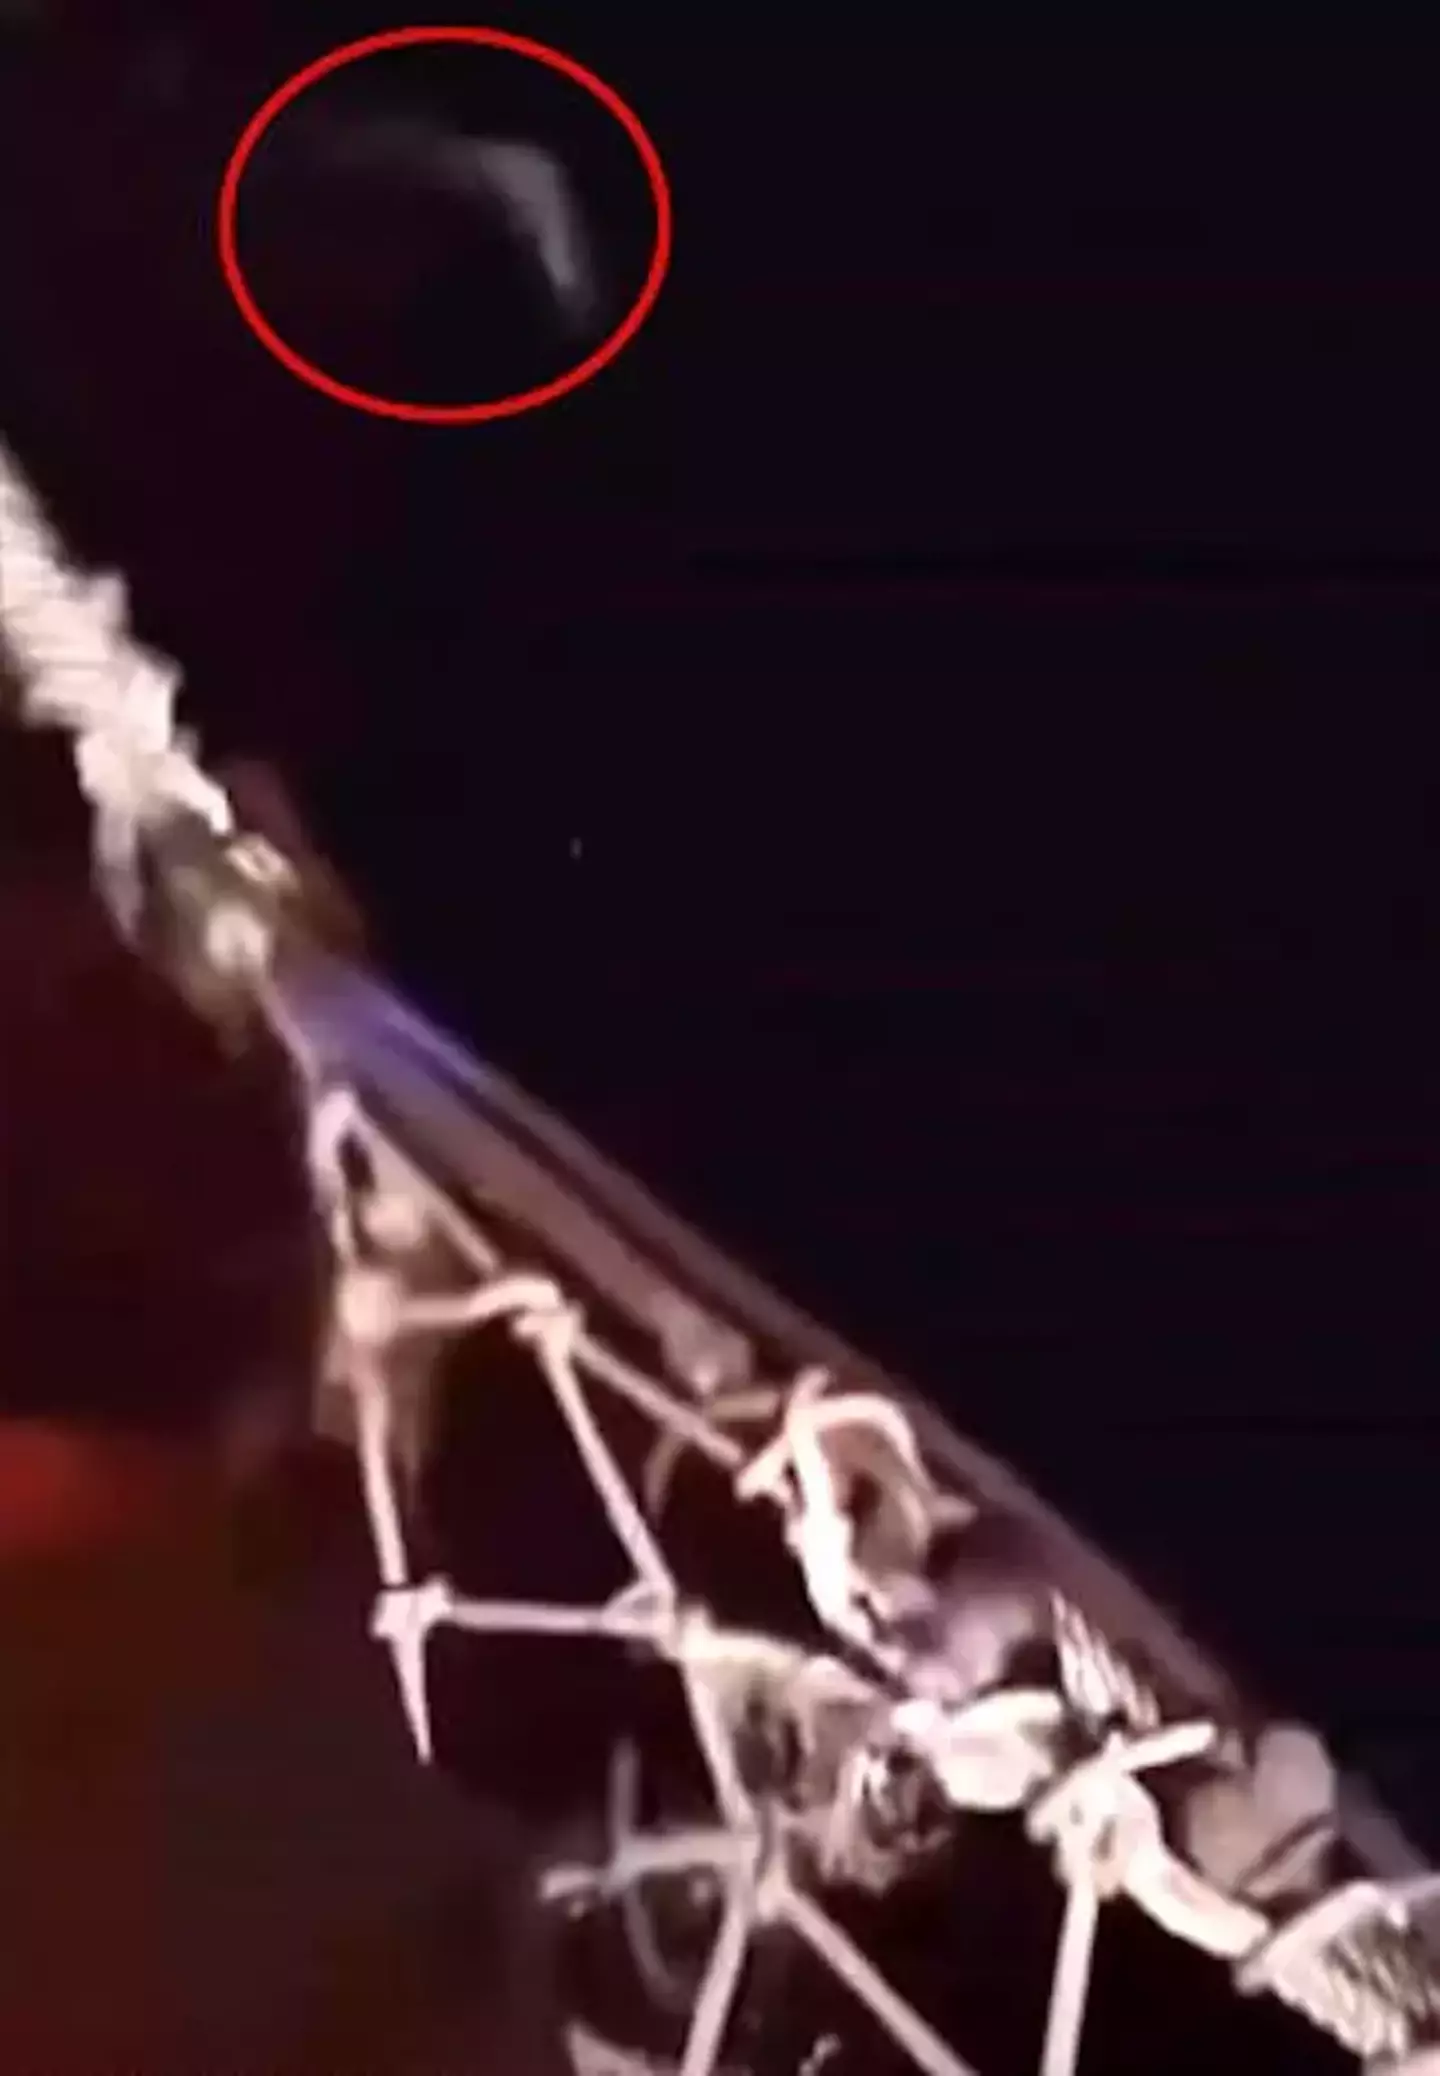 Viewers think the circled image is of a 'shark'.